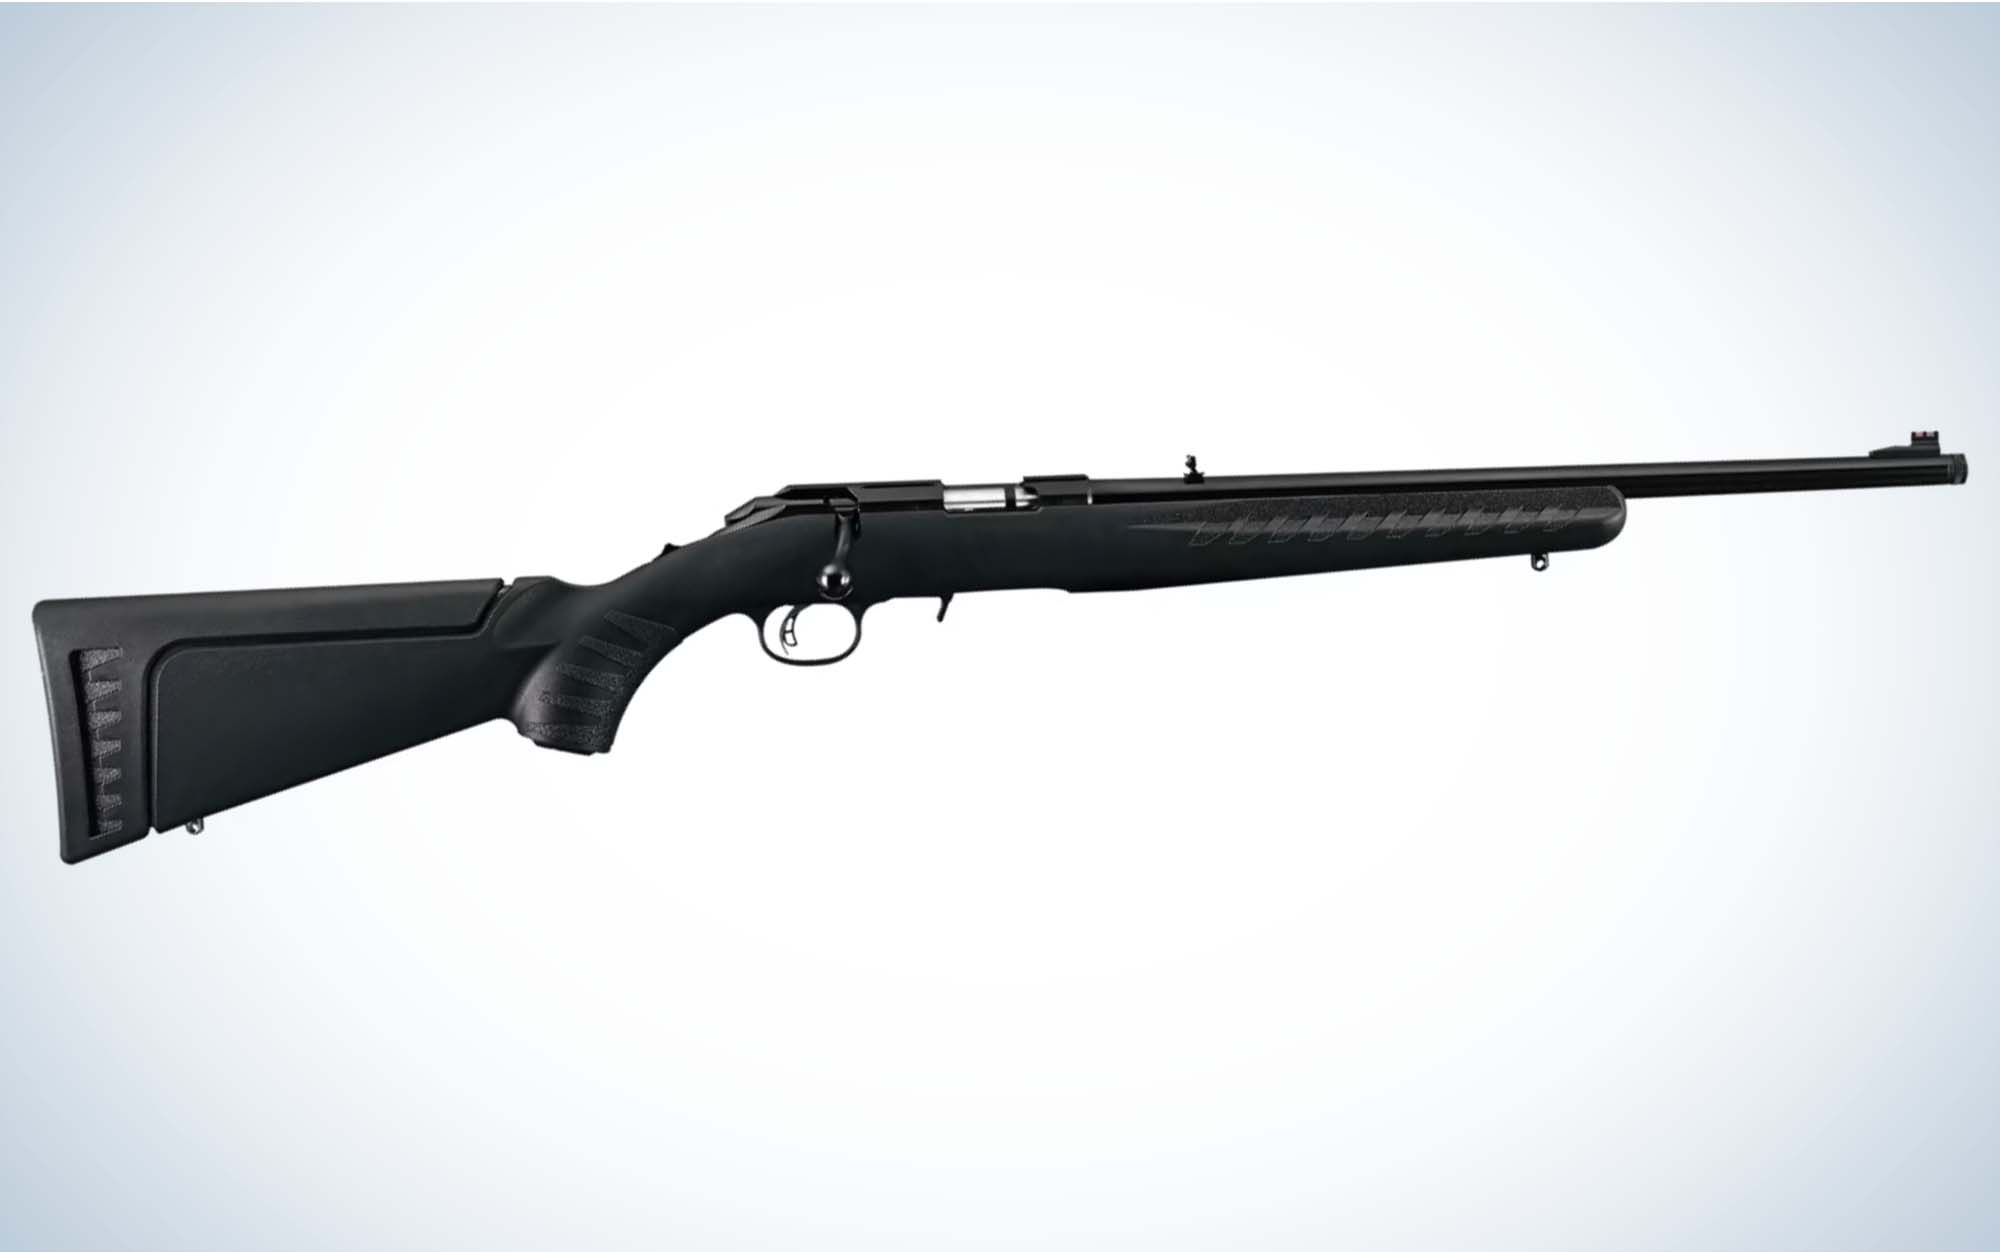 The Ruger American is the best affordable rimfire rifle.